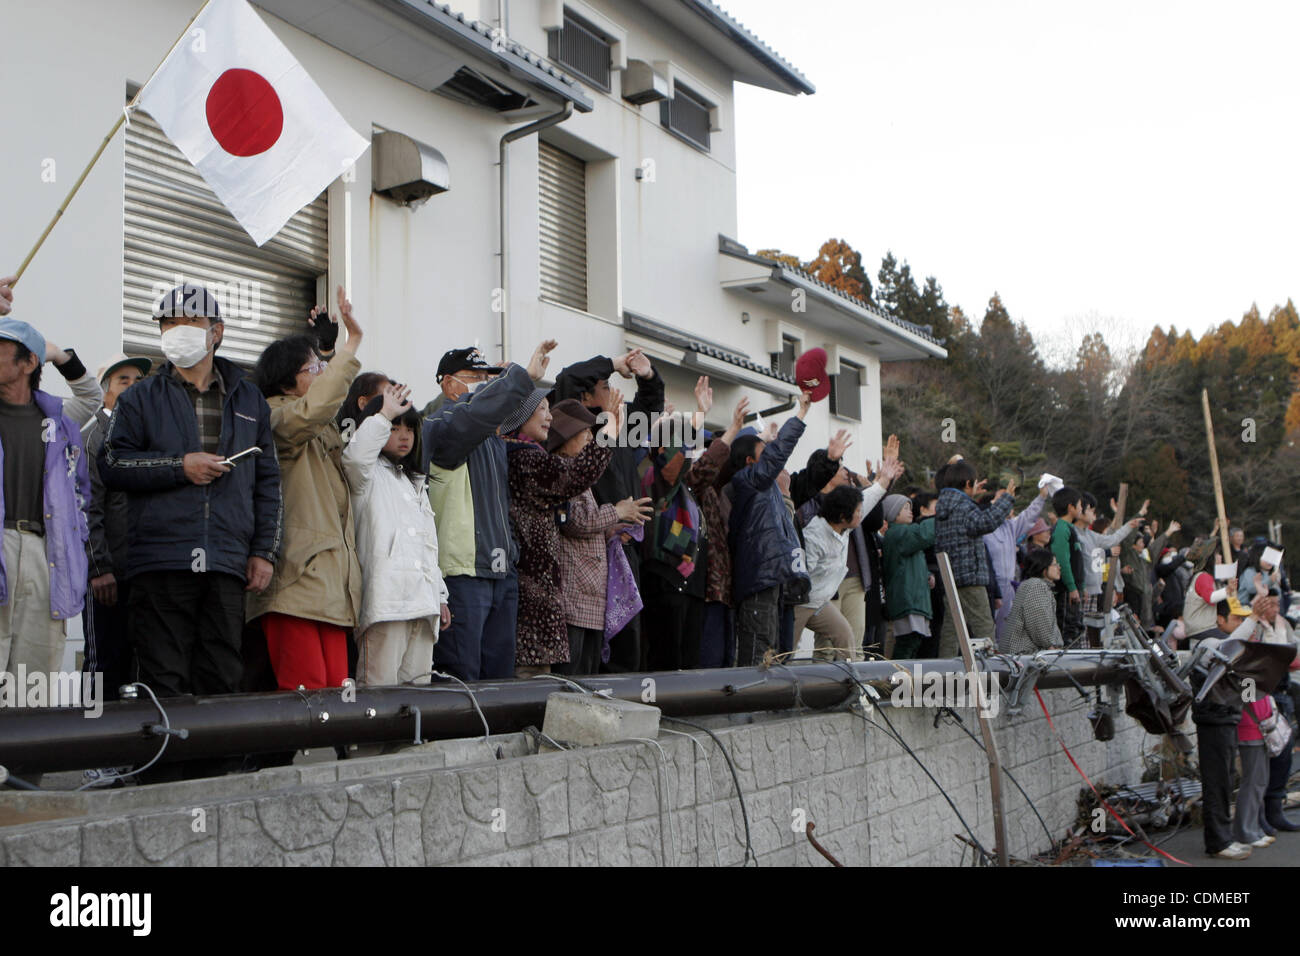 Apr. 6, 2011 - Miyagi, Japan - OSHIMA ISLAND, Miyagi, Japan - About 200 residents wave goodbye to Marines and Sailors of the 31st Marine Expeditionary Unit, as they board a U.S. Navy landing craft utility, April 6.  The Marines and Sailors spent about six days cleaning up debris on parts of the isla Stock Photo